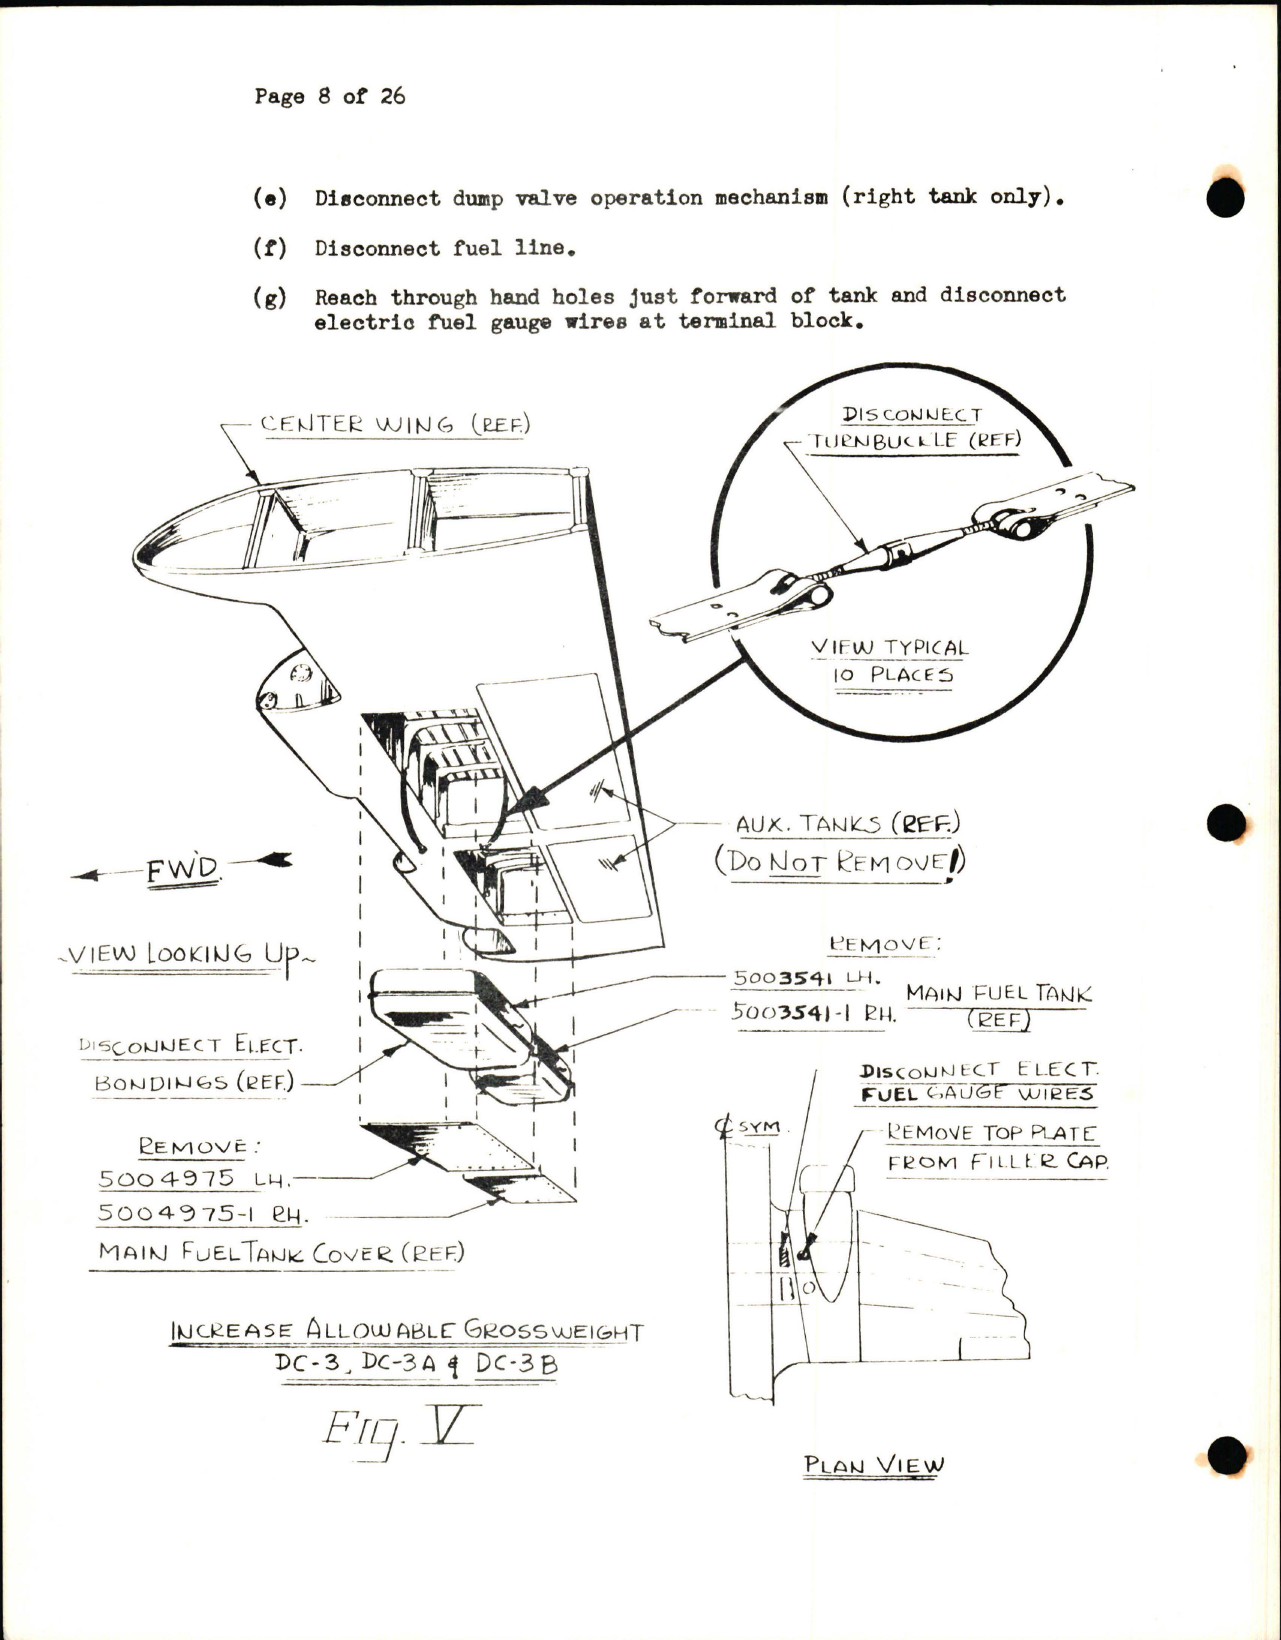 Sample page 7 from AirCorps Library document: Modification of Oil Tank Hopper Assembly 